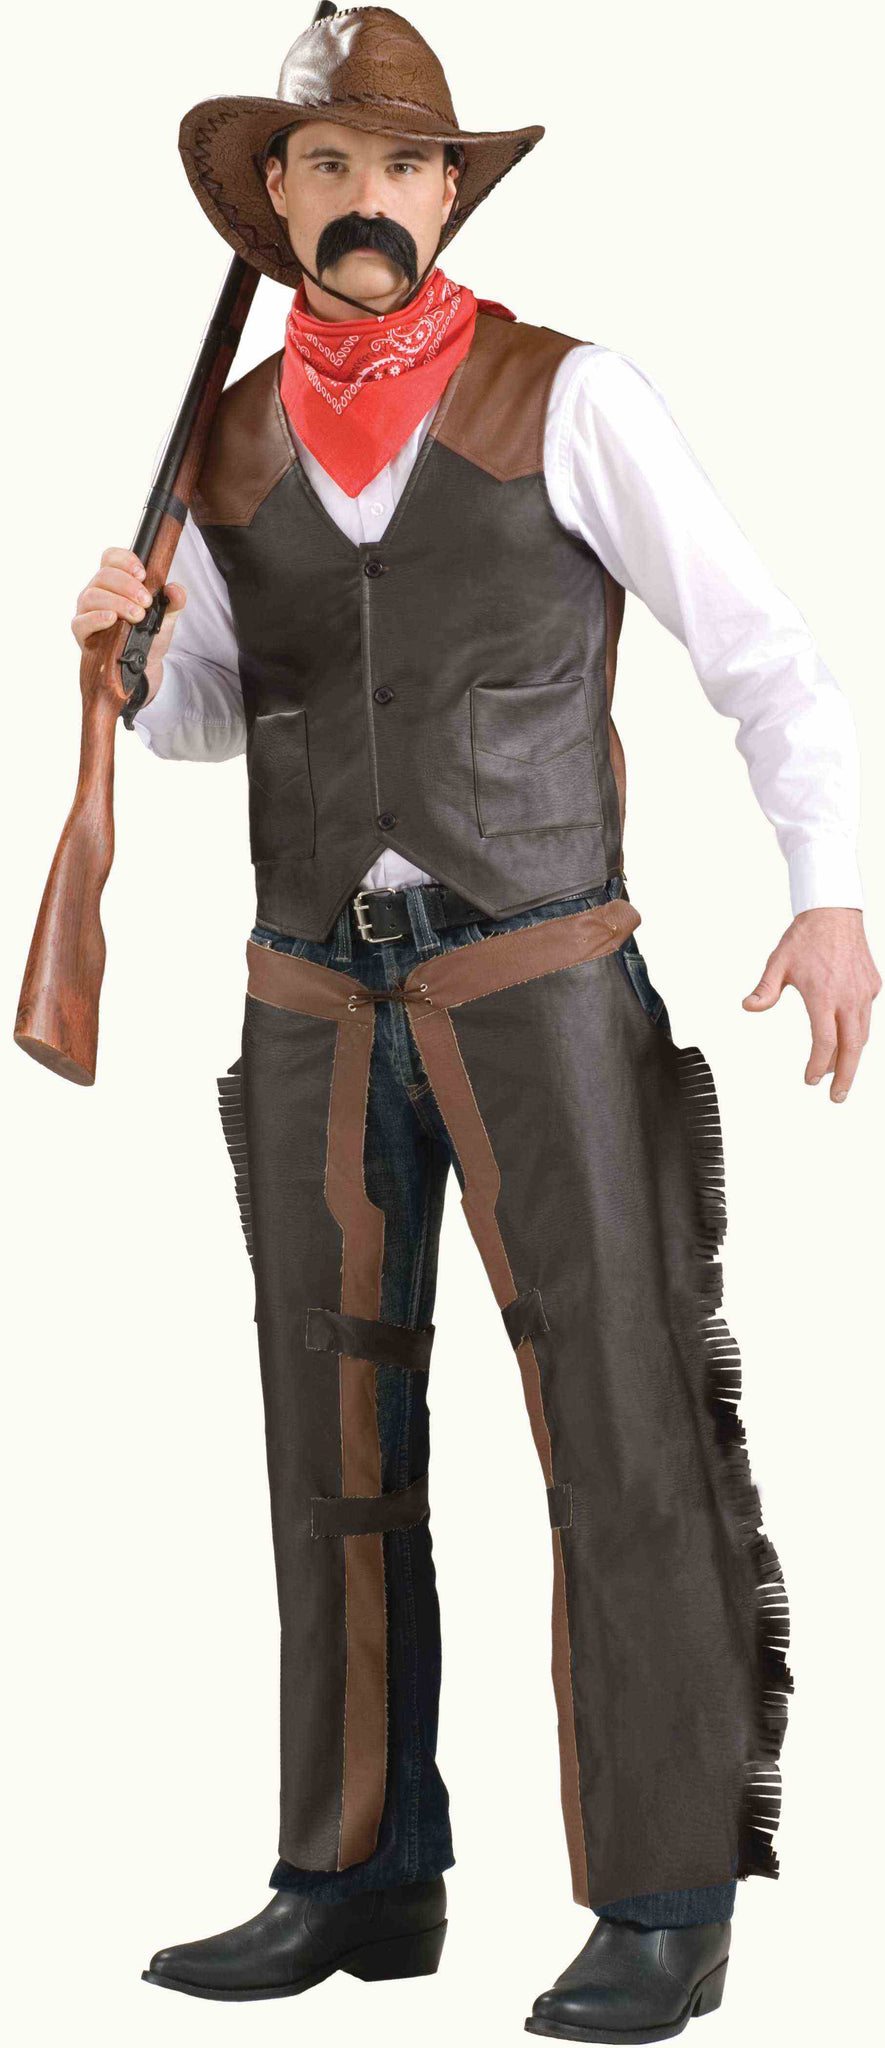 Brown chaps, tie in the front